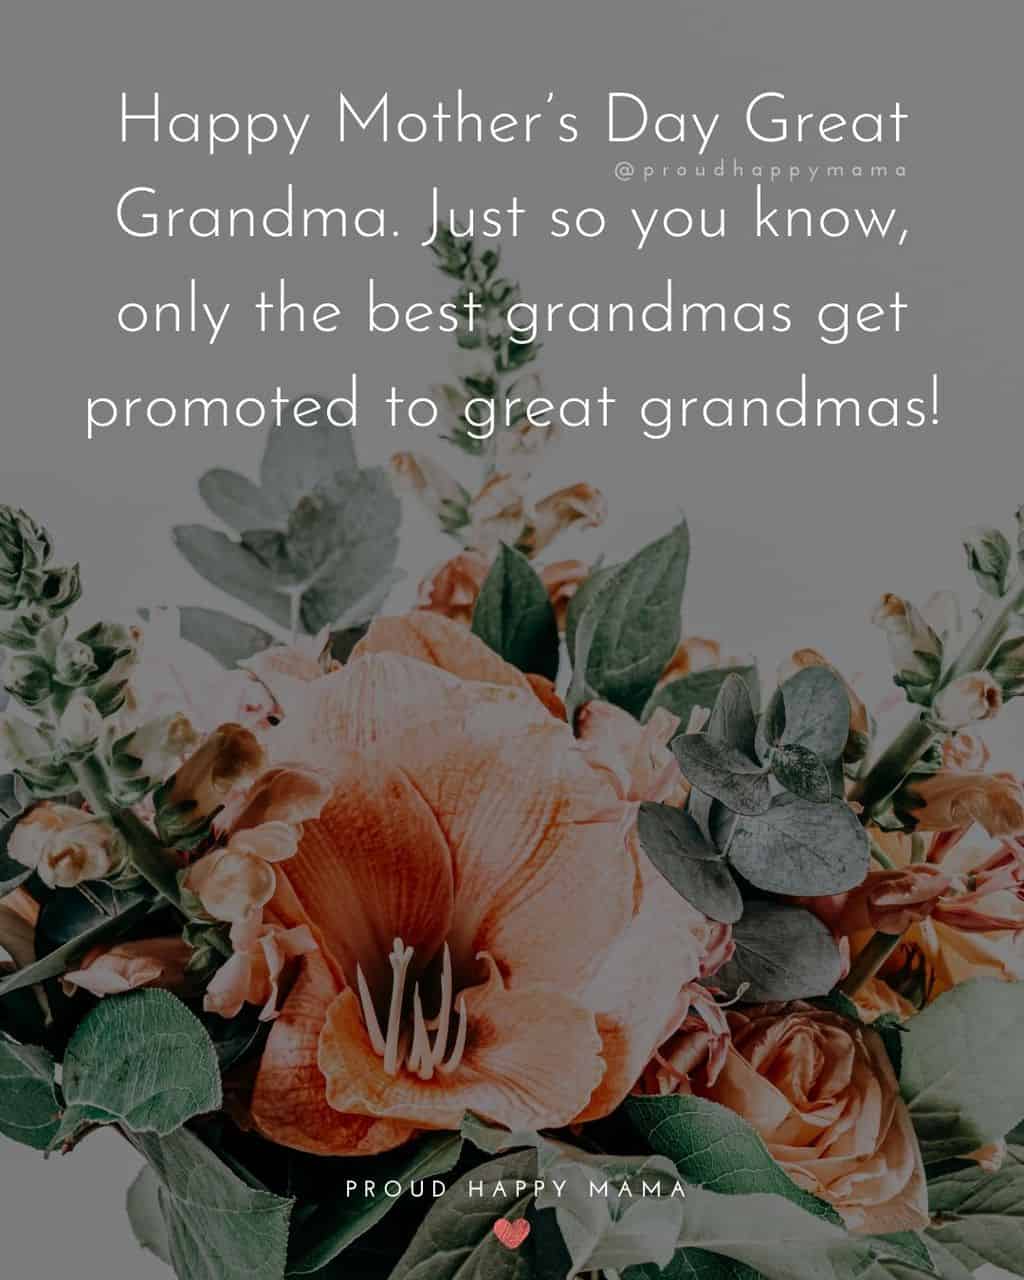 Happy Mothers Day Quotes To Grandma - Happy Mother’s Day Great Grandma. Just so you know, only the best grandmas get